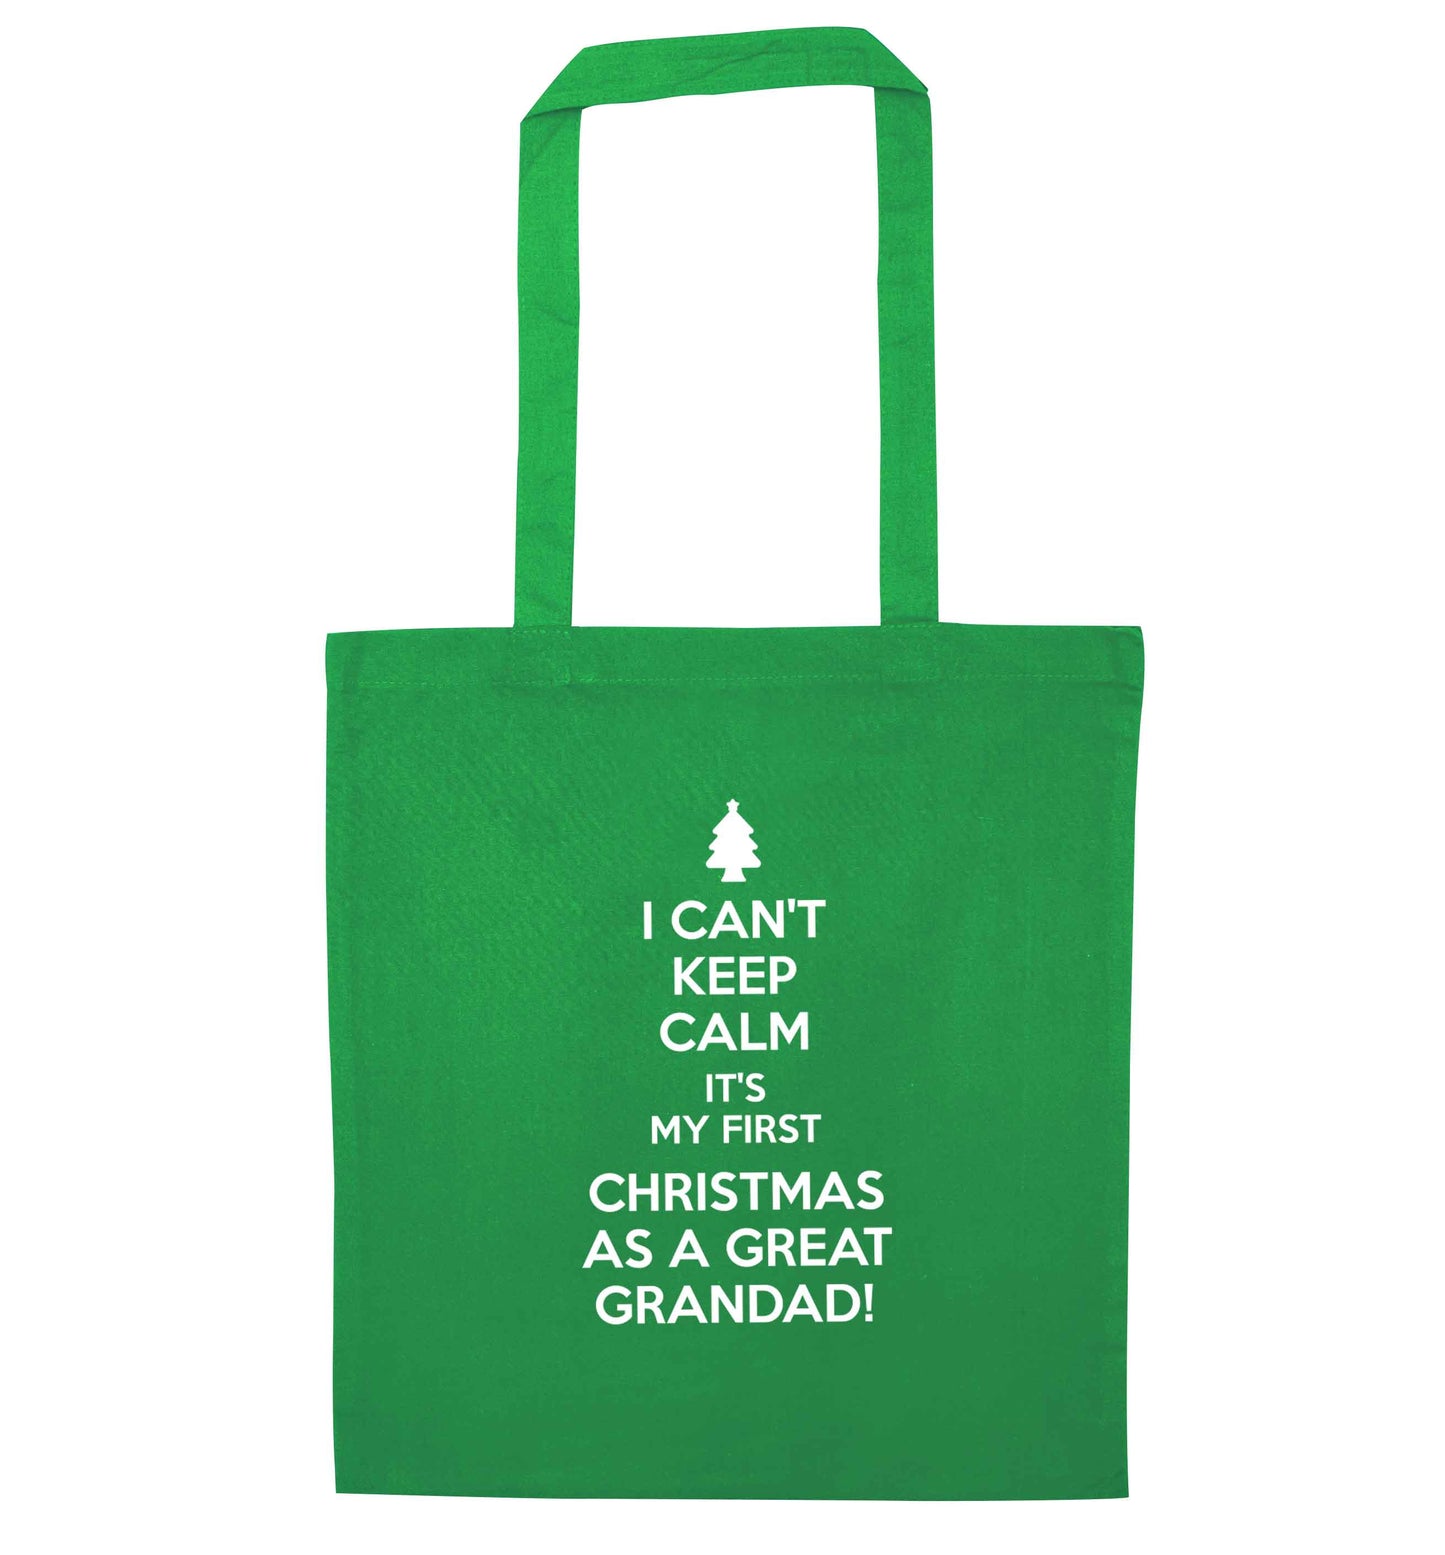 I can't keep calm it's my first Christmas as a great grandad! green tote bag